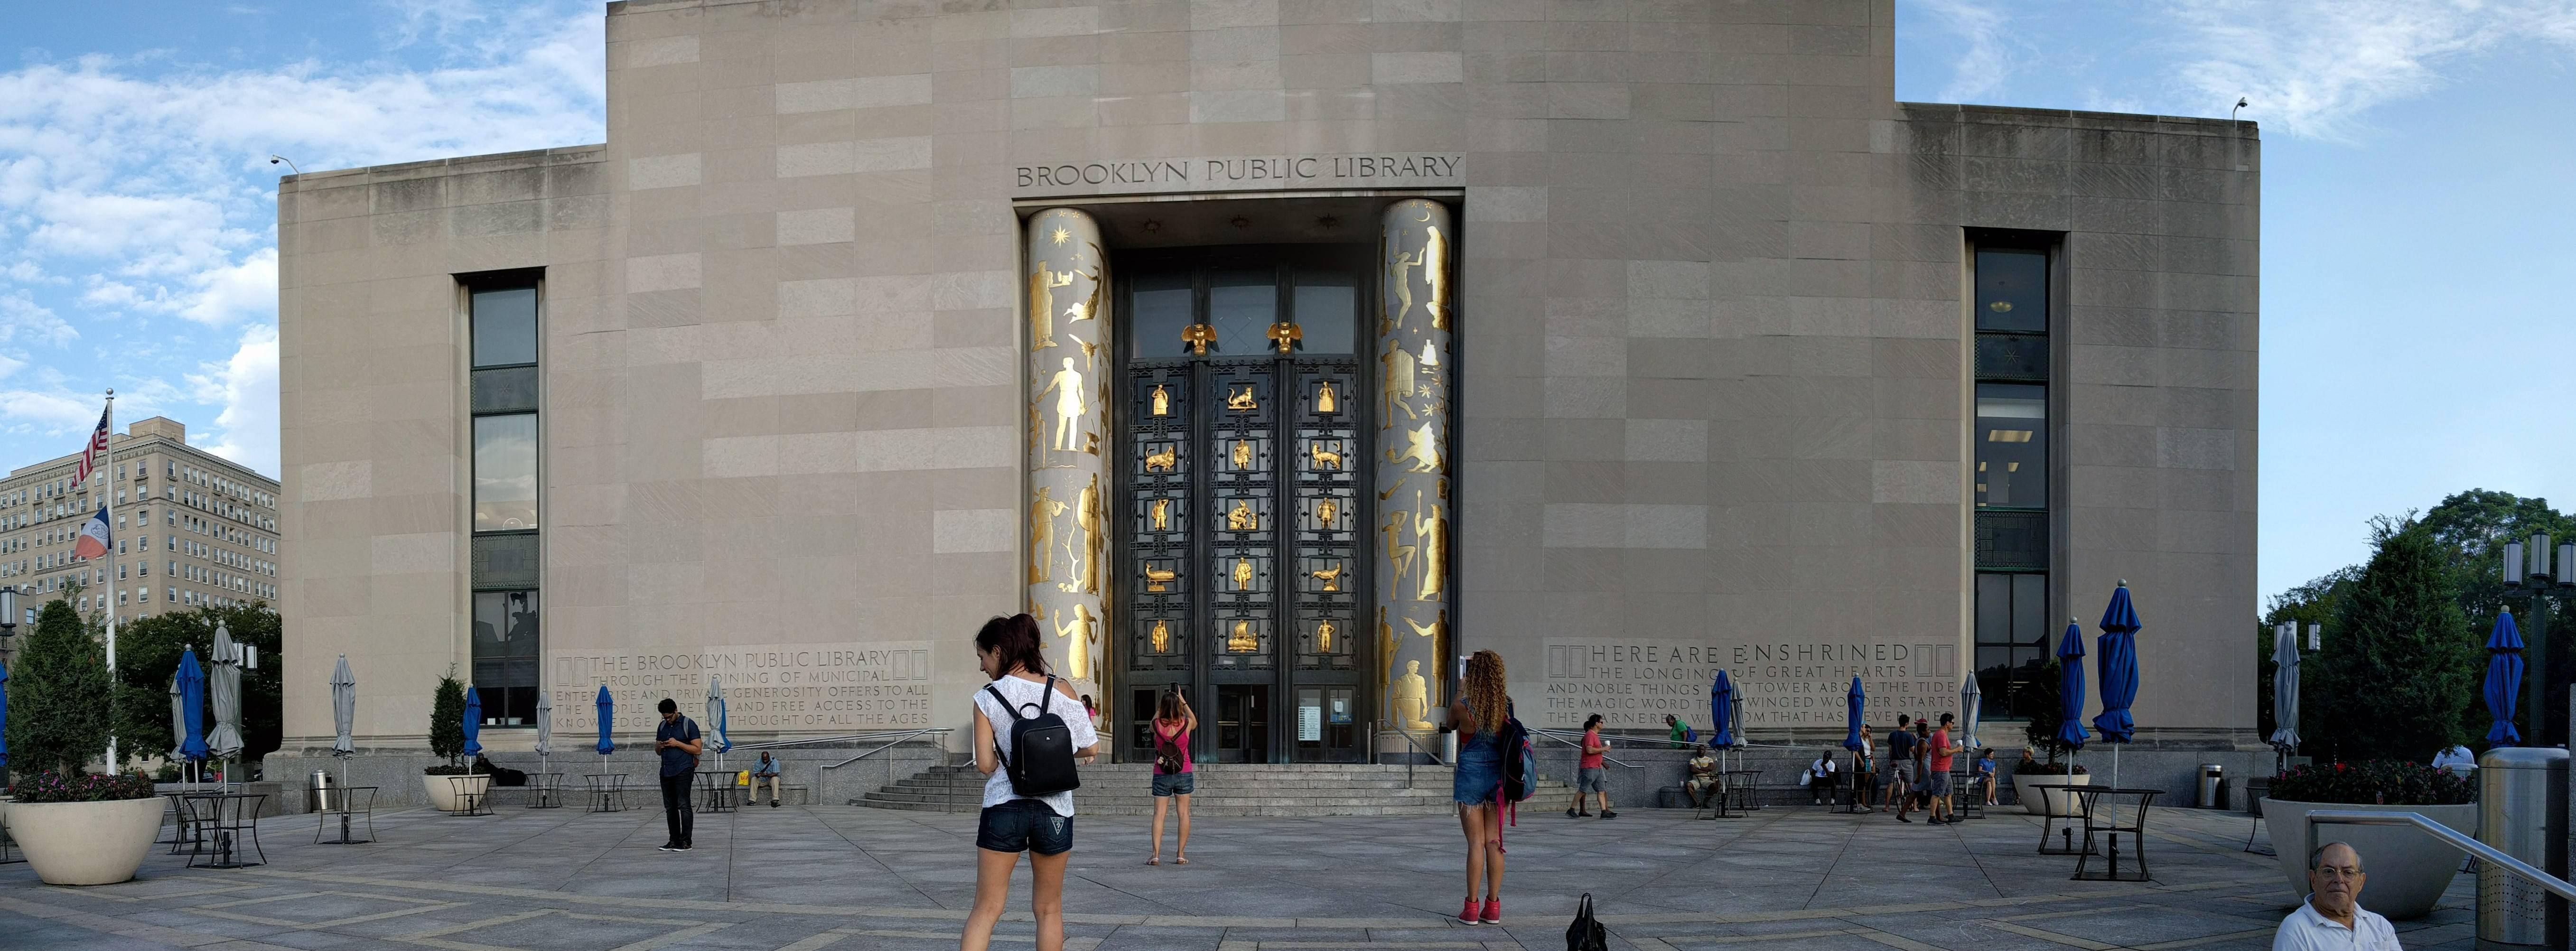 The Brooklyn Central Library